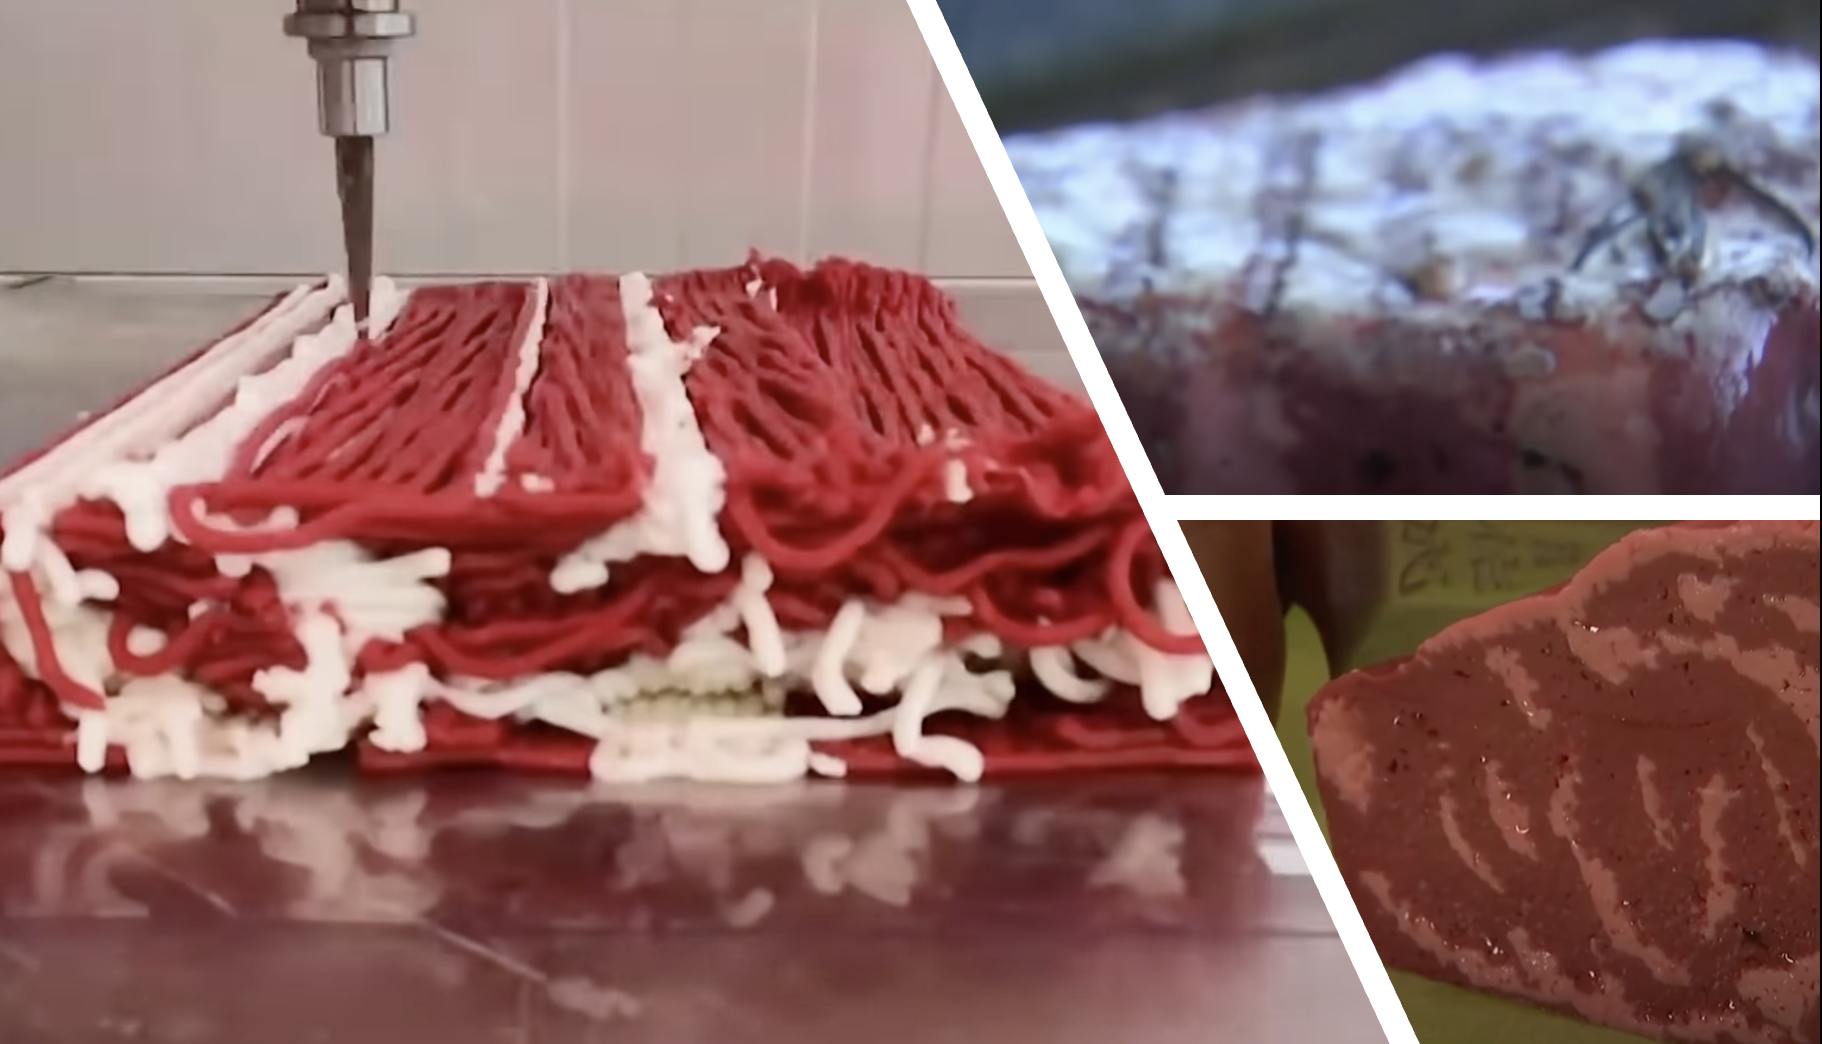 3D printed meat being made and cooked